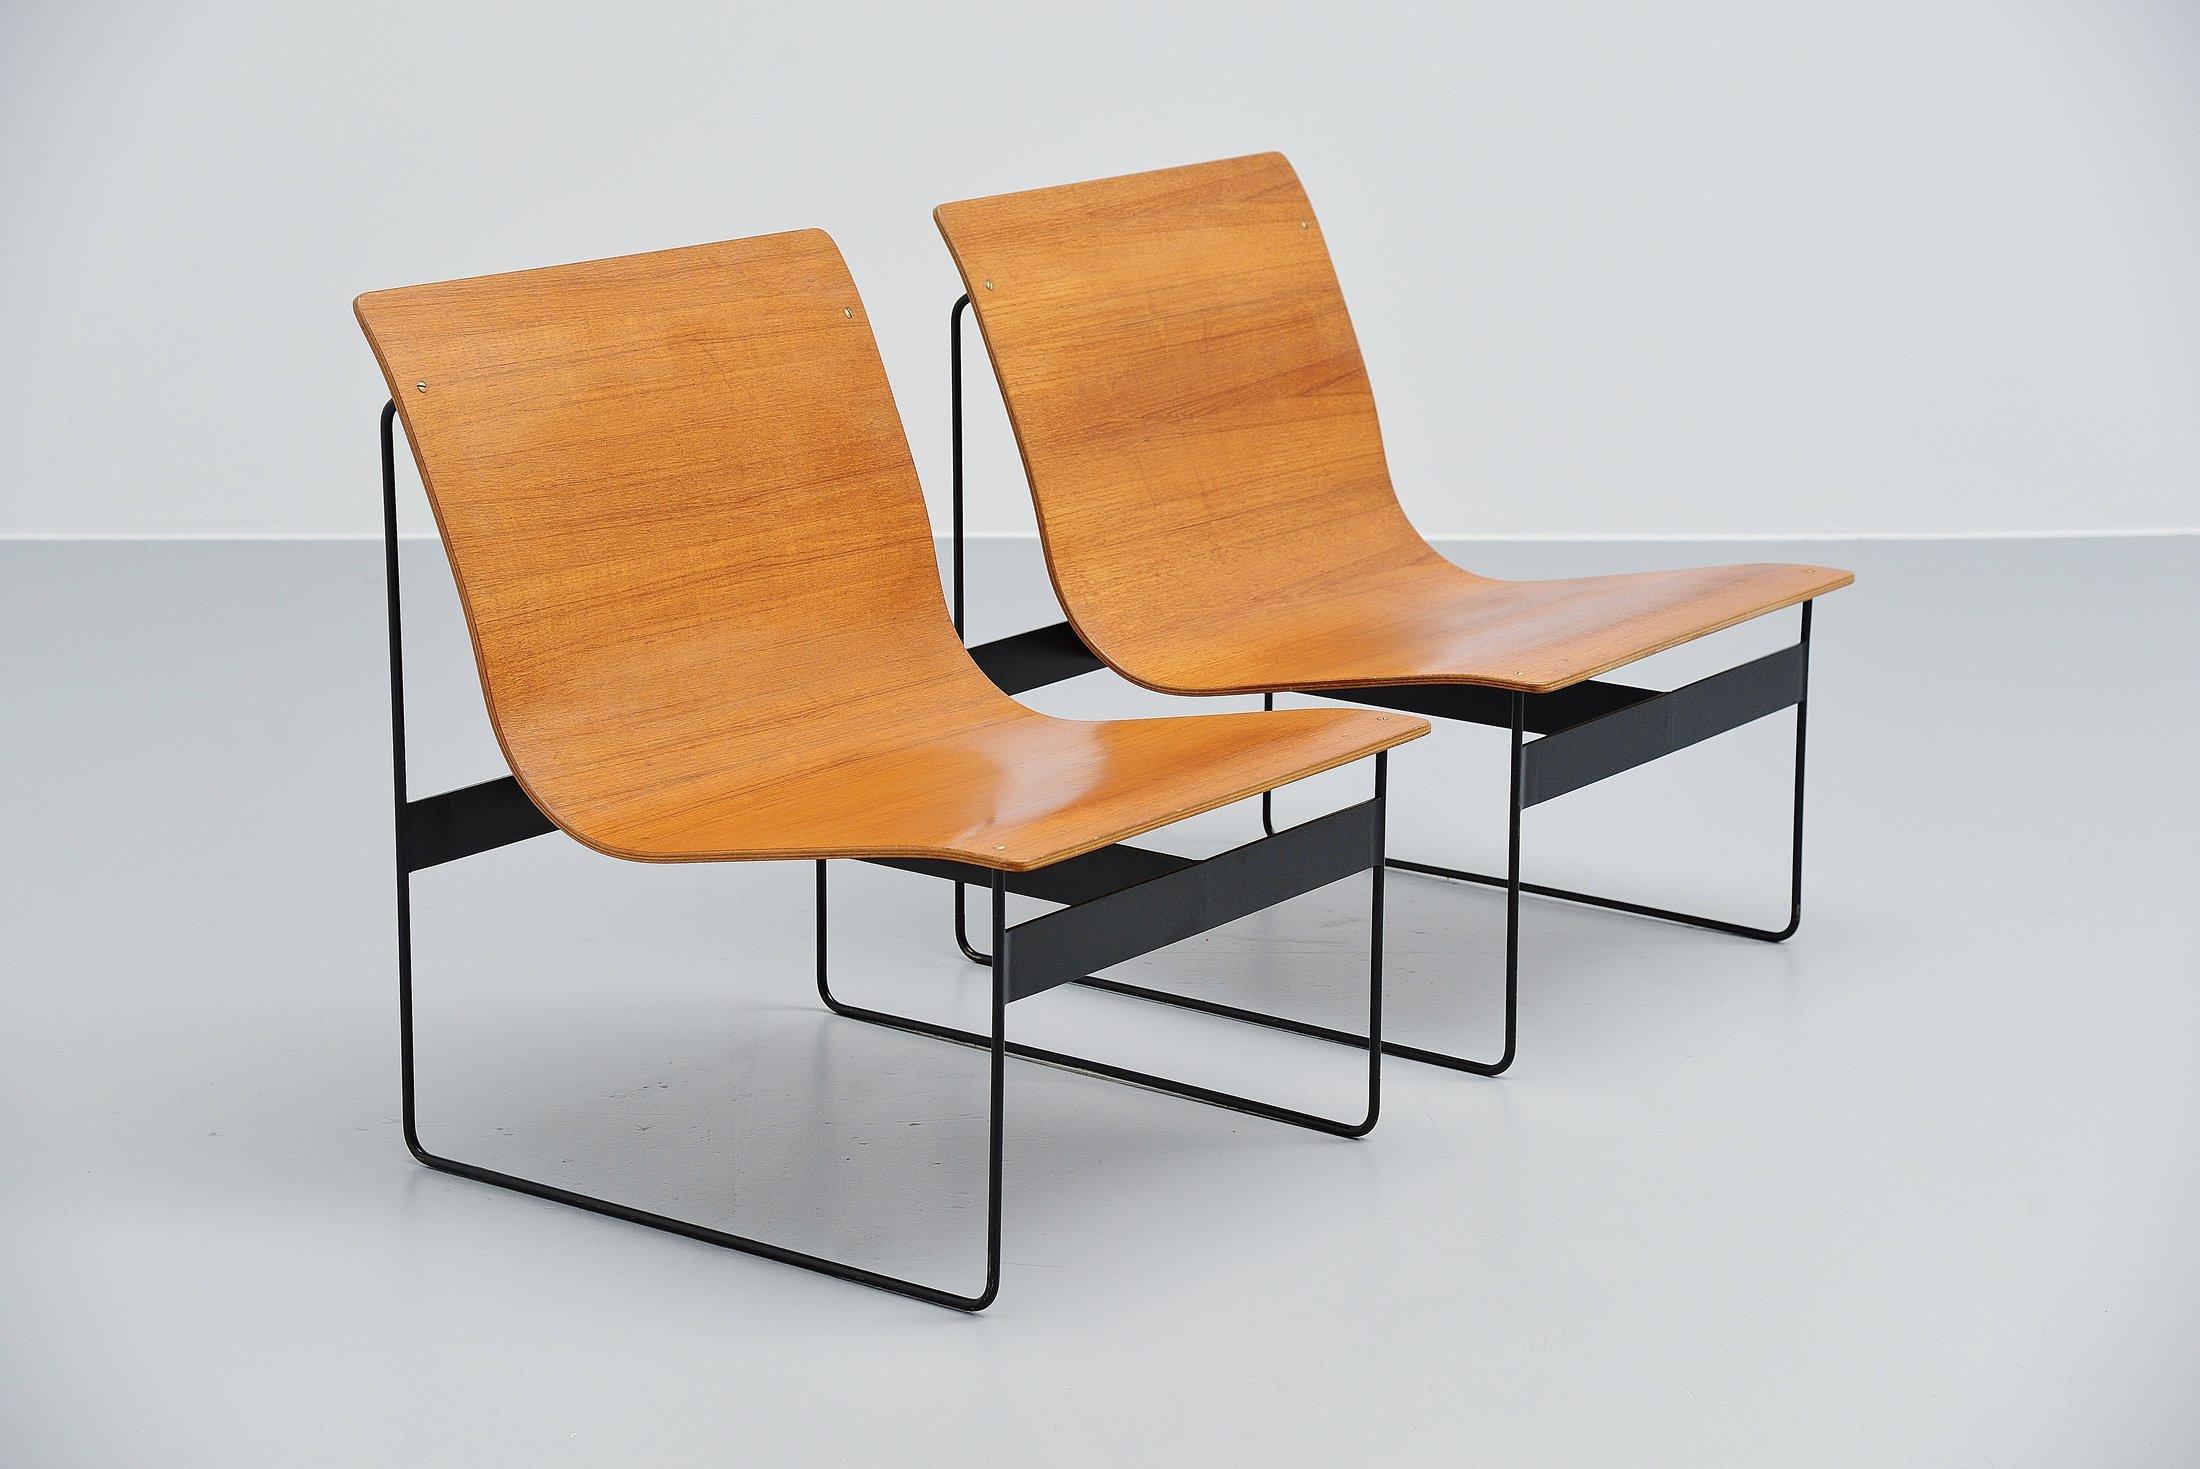 Cold-Painted Günter Renkel Rego Lounge Chairs, Germany, 1959